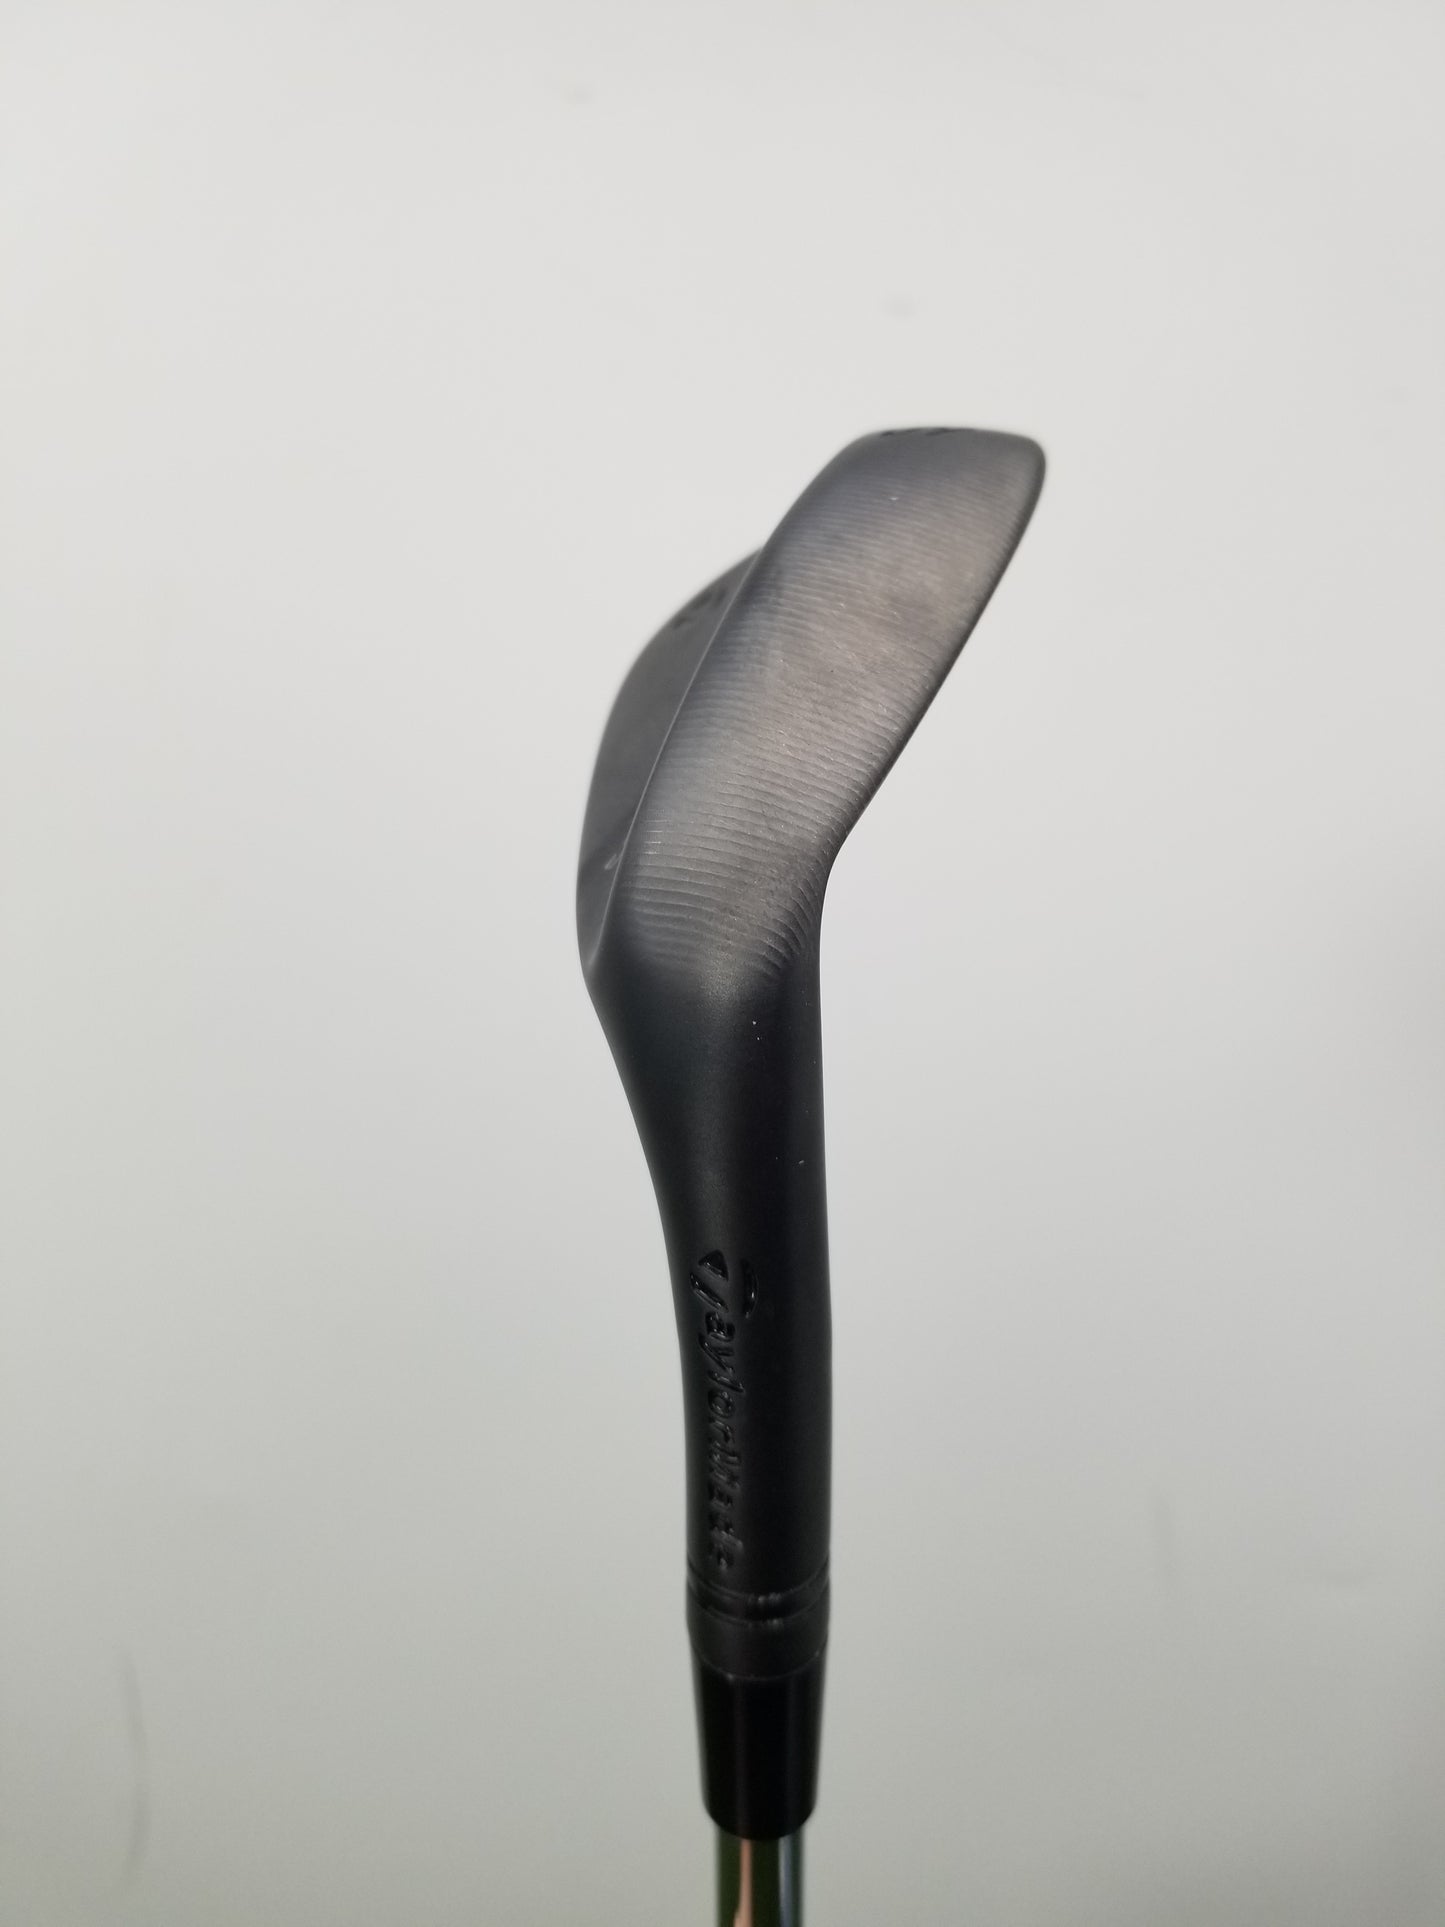 2021 TAYLORMADE MILLED GRIND 3 WEDGE 60*/12HB STIFF RIFLE PRECISION 6.0 VERYGOOD